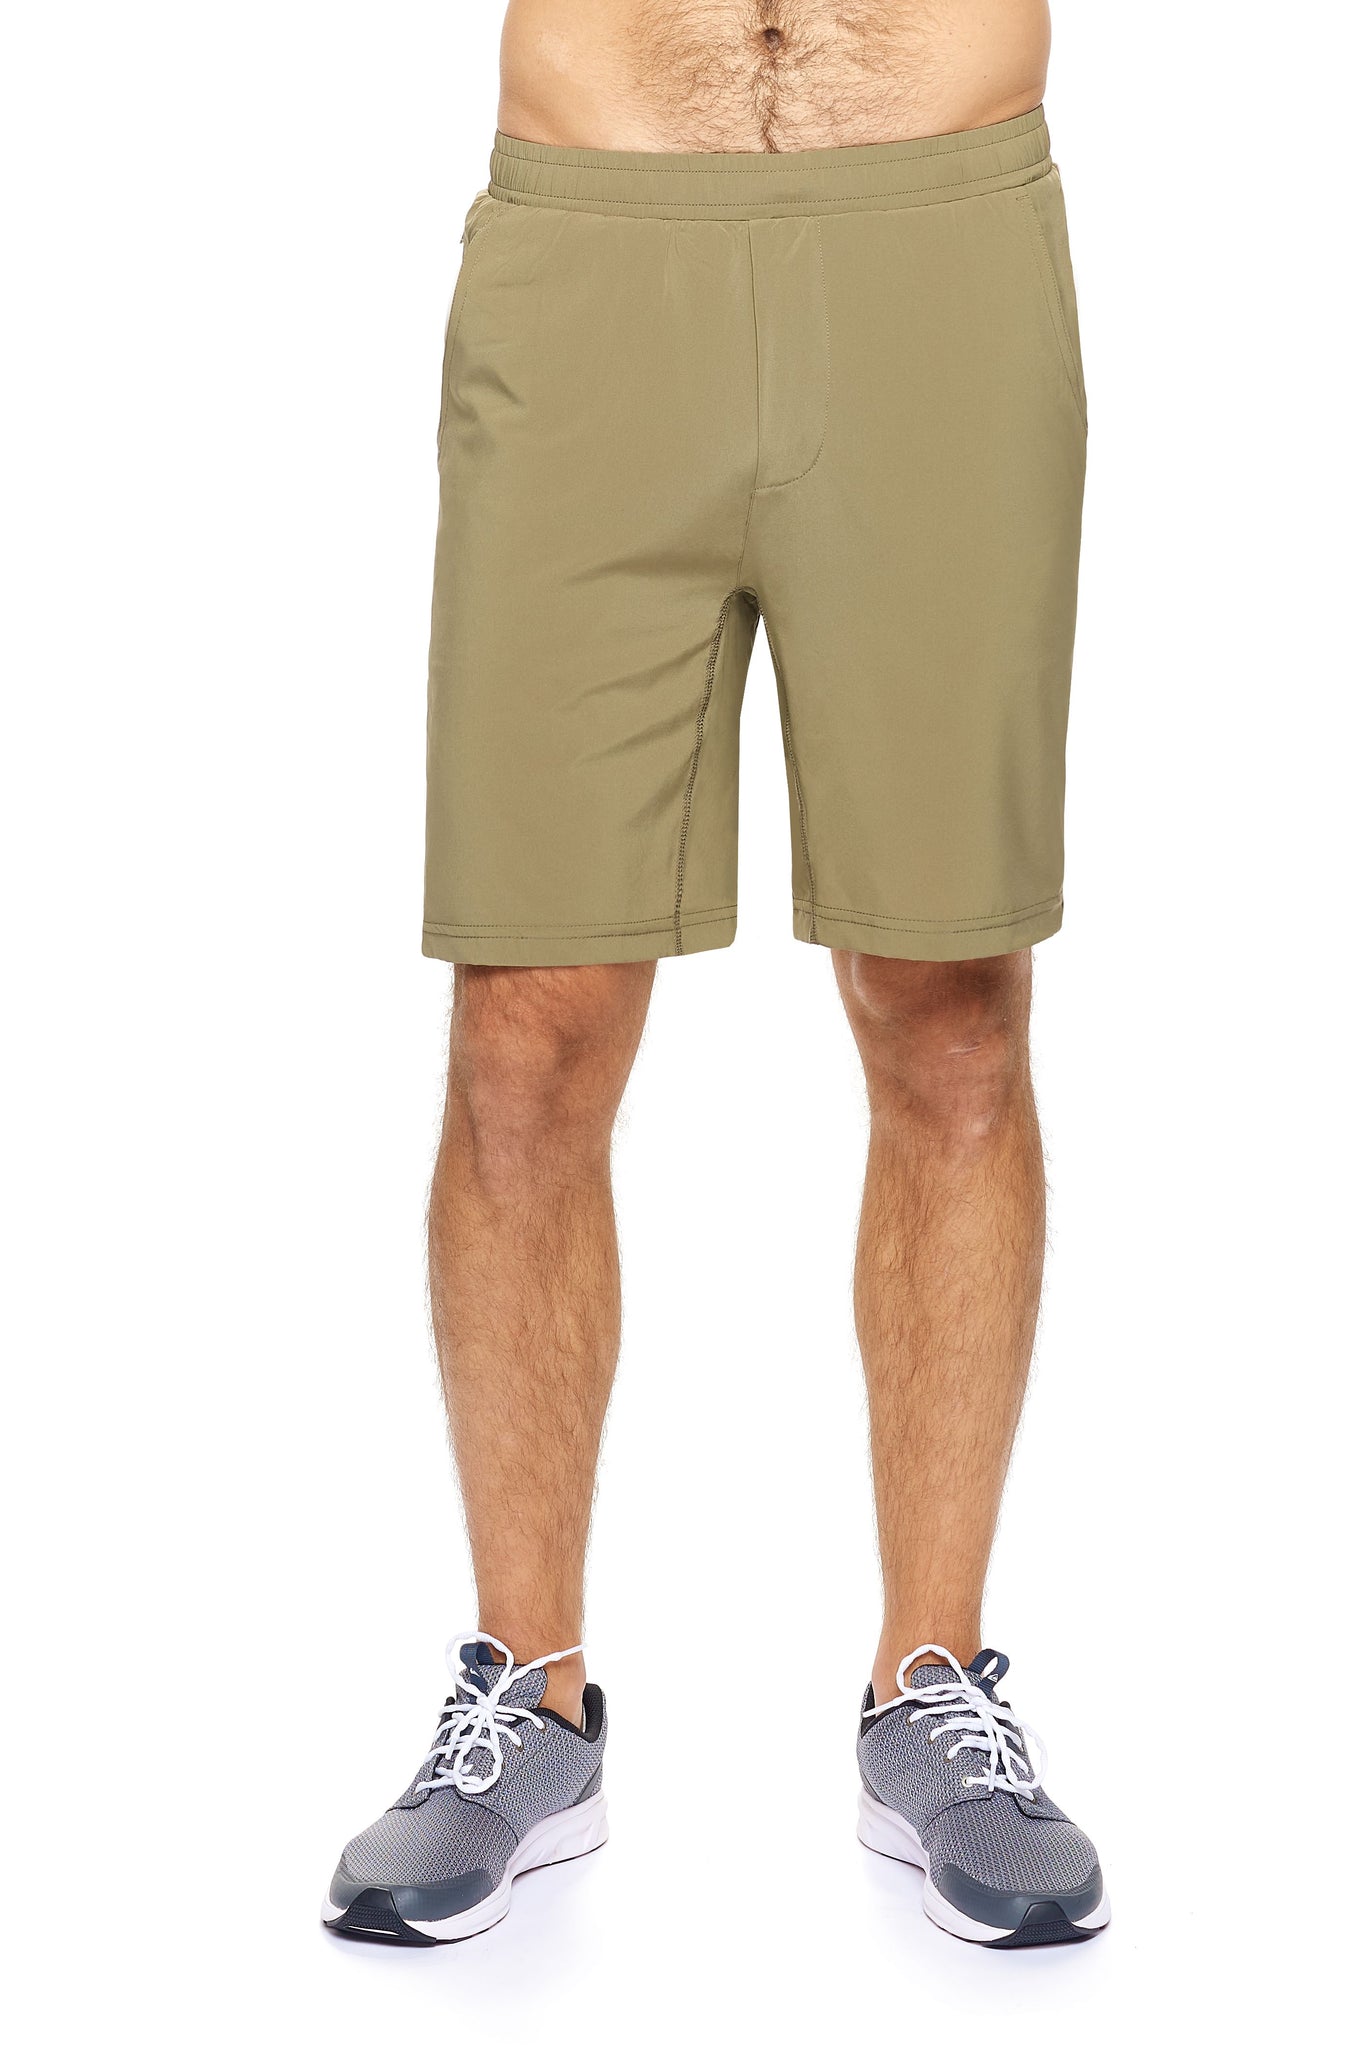 Expert Brand Wholesale Men's Paradise Shorts Gym Workout in Olive Green#olive-green